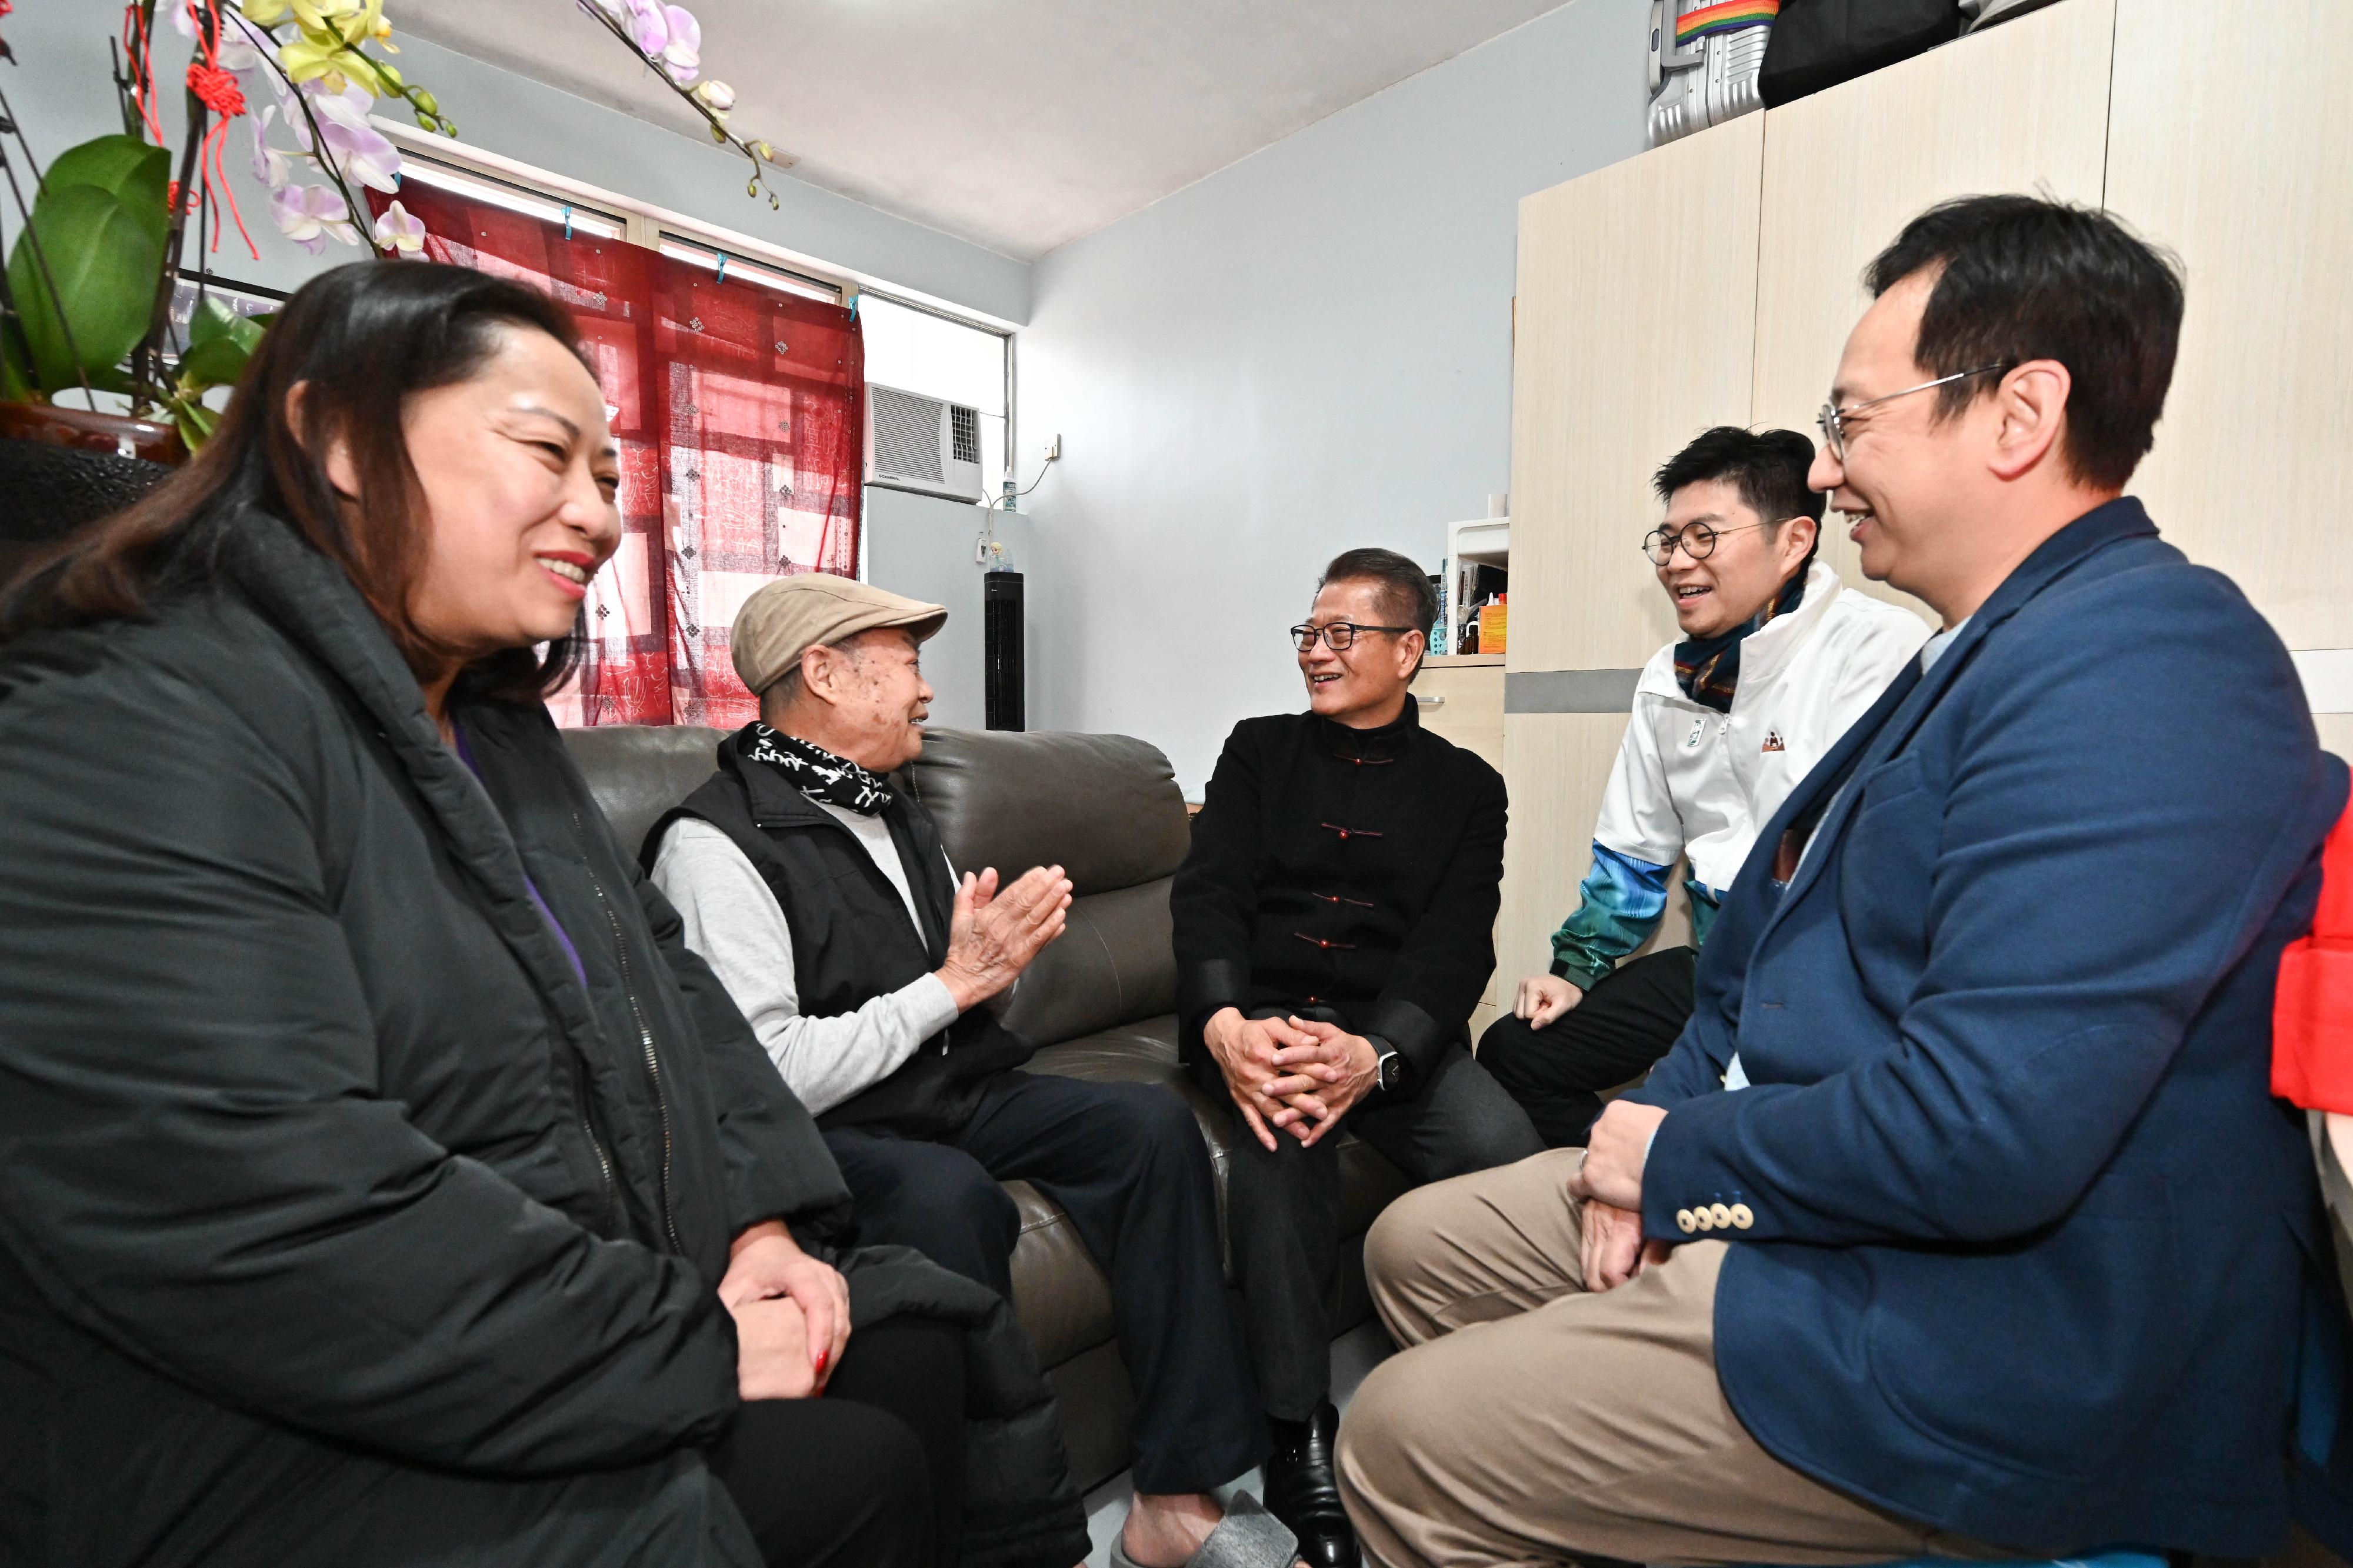 The Financial Secretary, Mr Paul Chan (centre), accompanied by the District Officer (Kwun Tong), Mr Denny Ho (second right), visits elderly people living in Tak Tin Estate, Lam Tin, today (February 9) to extend Chinese New Year blessings.